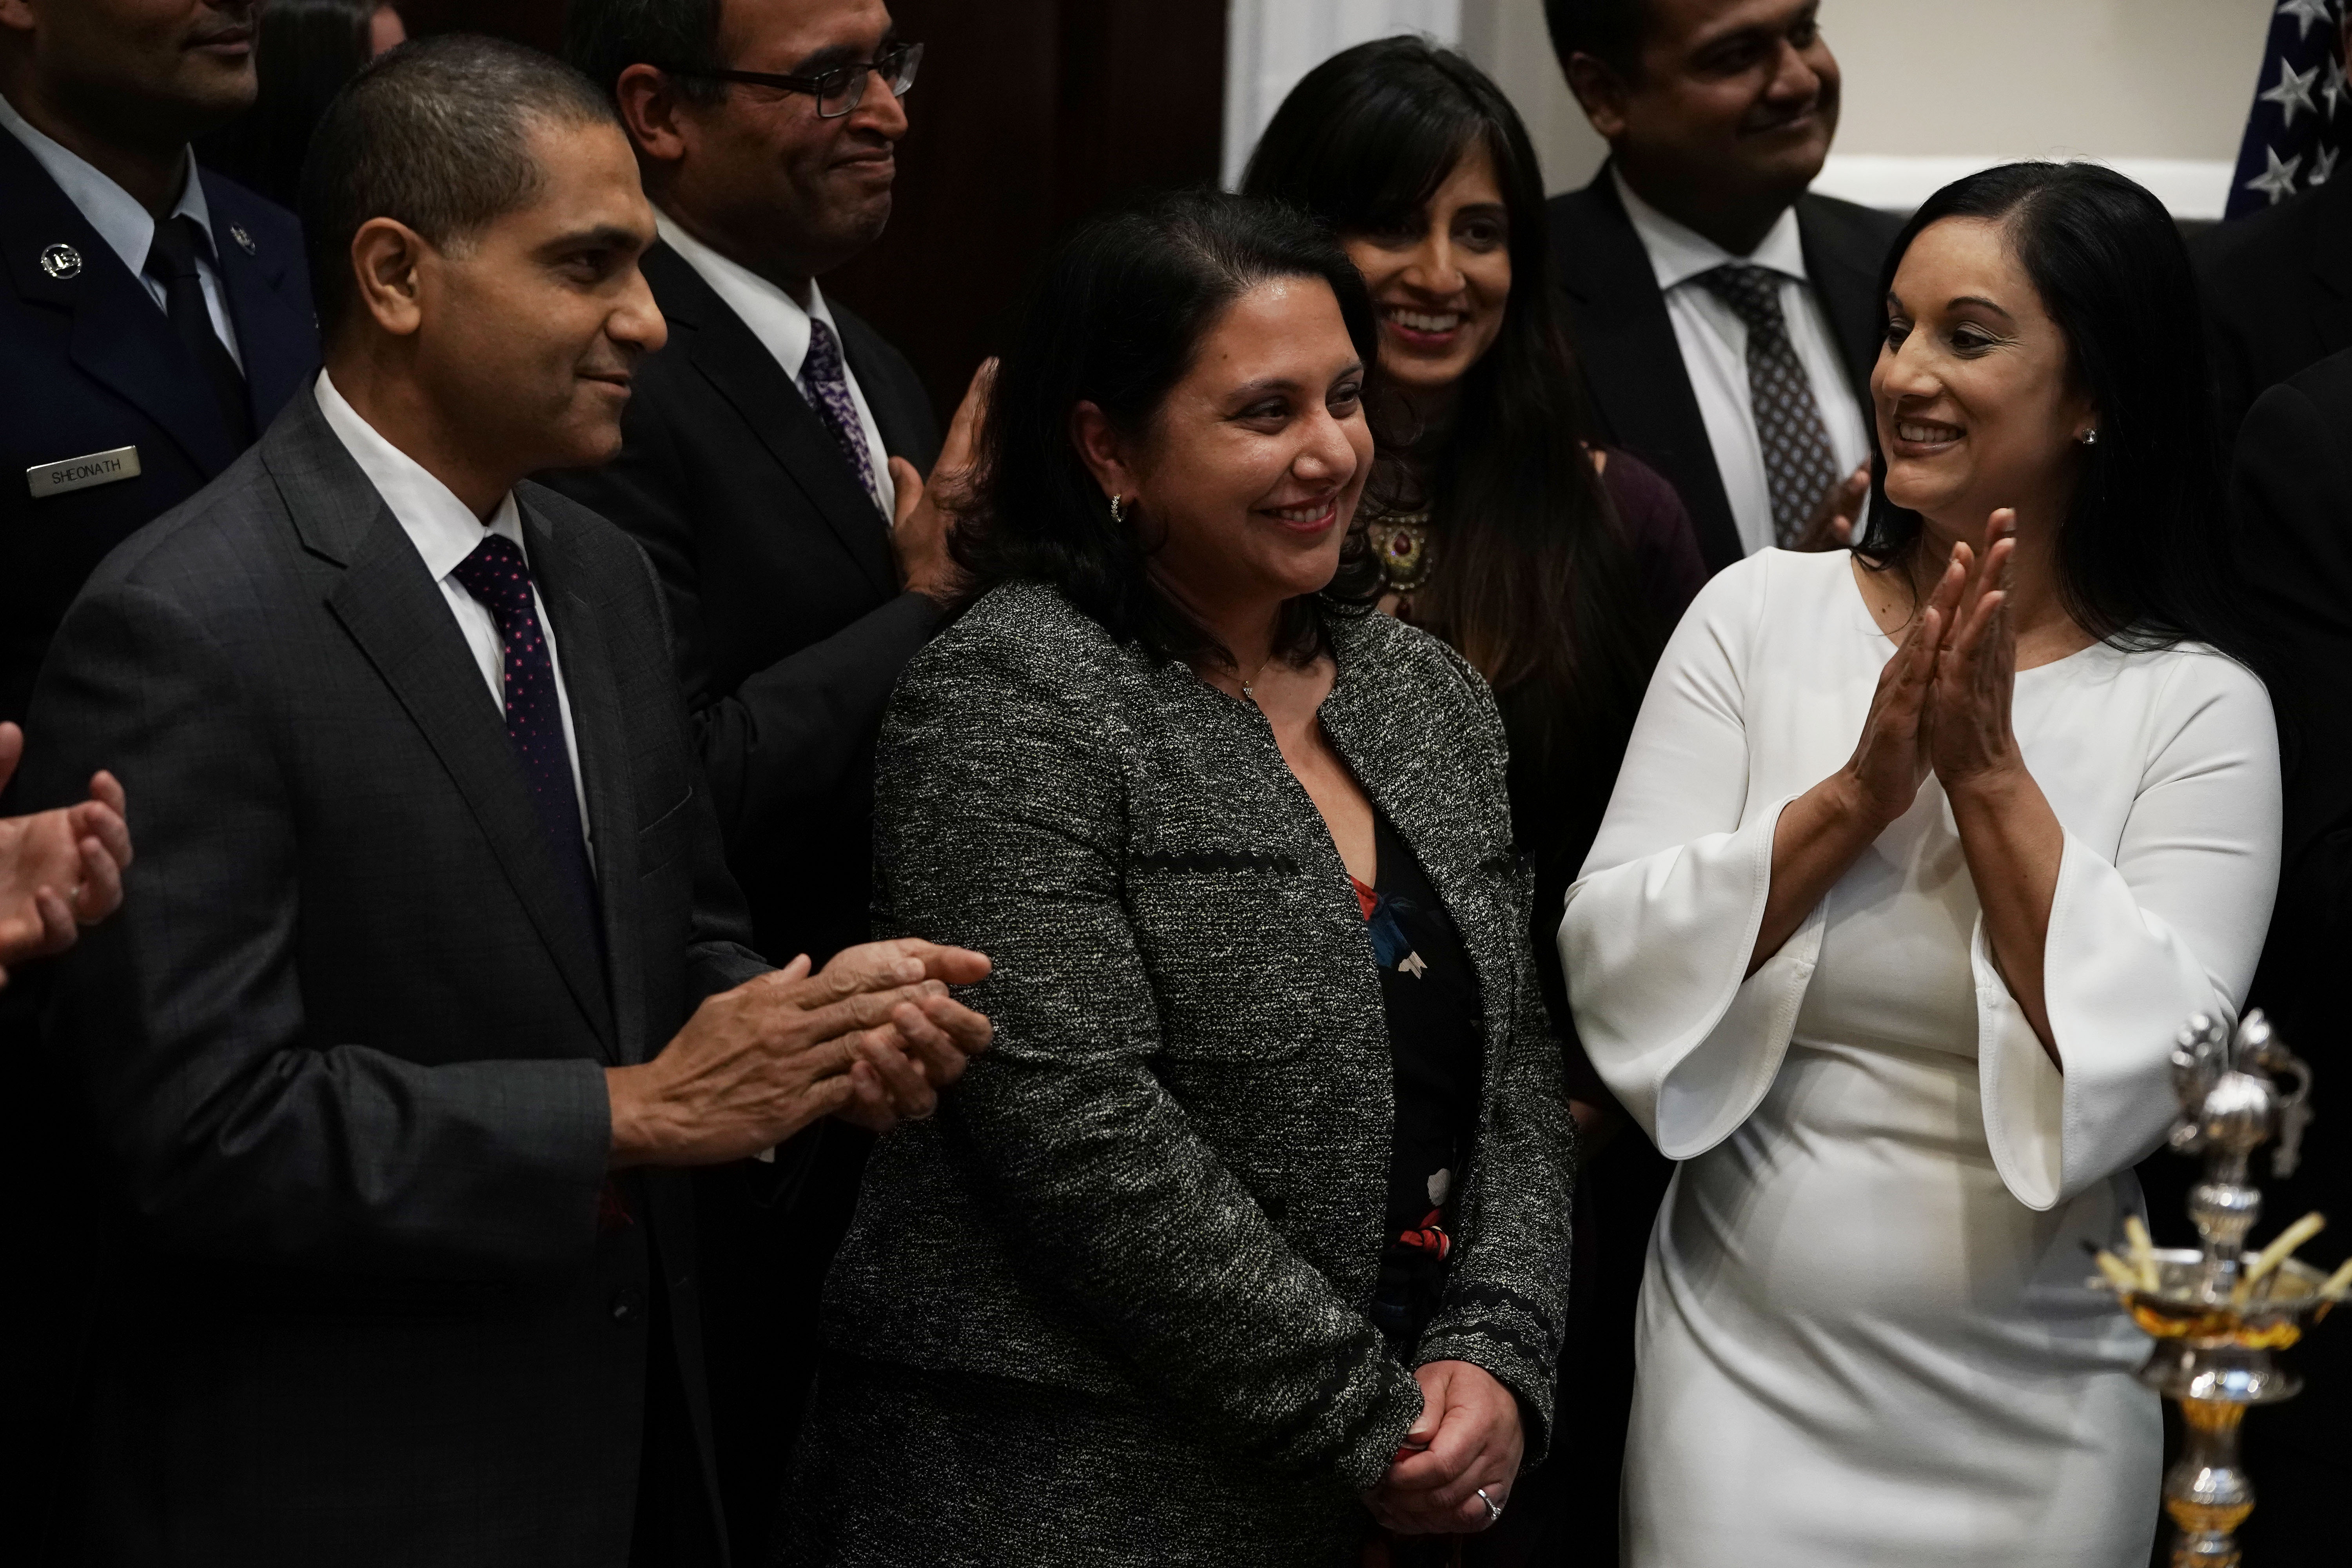 Neomi Rao (C) is introduced during a Diwali ceremony in the Roosevelt Room of the White House on November 13, 2018. (Alex Wong/Getty Images)